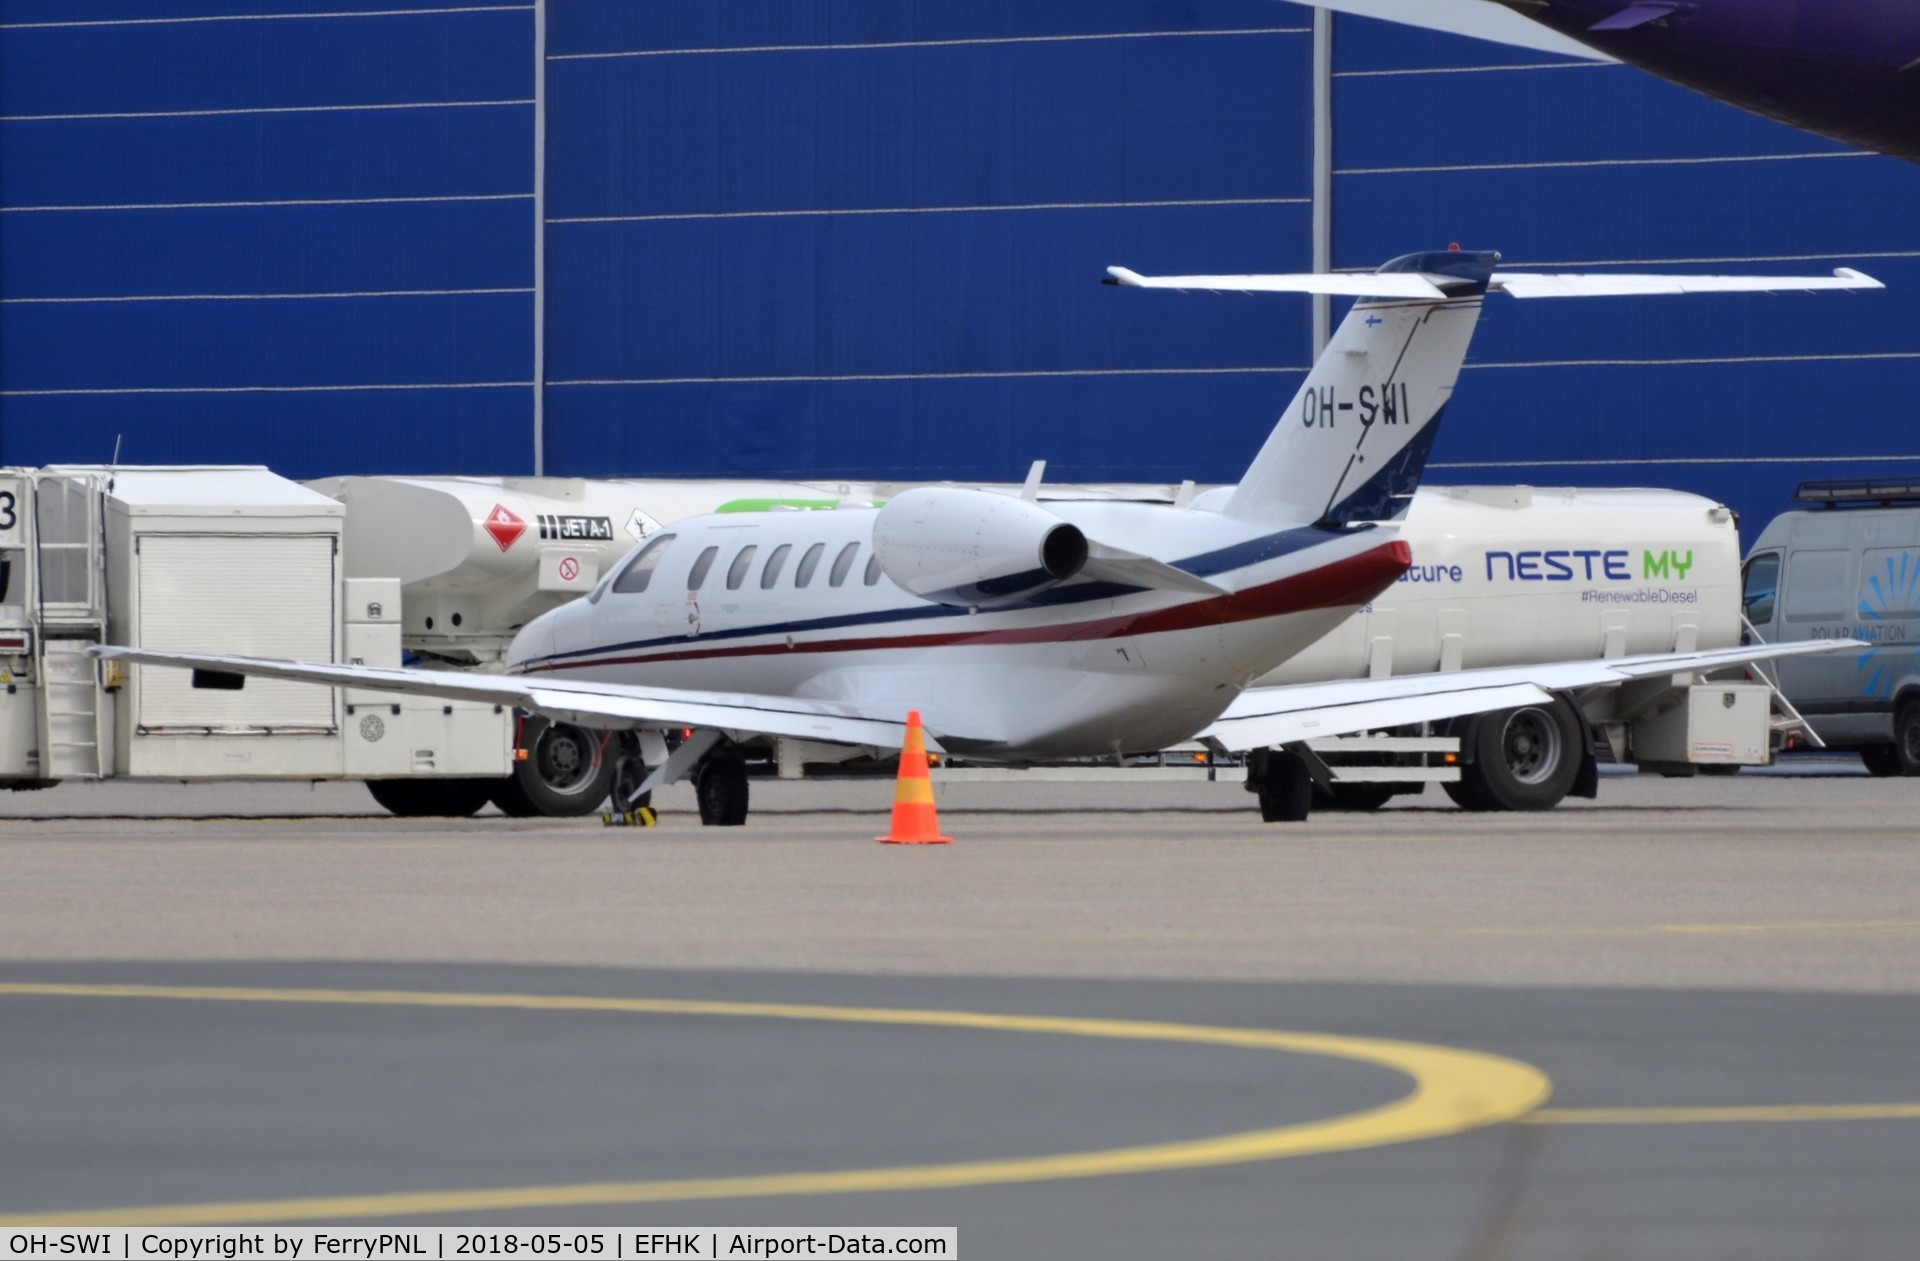 OH-SWI, 2008 Cessna 525A CitationJet CJ2+ C/N 525A-0408, Scanwings Ce525A refueled for next flight later today.